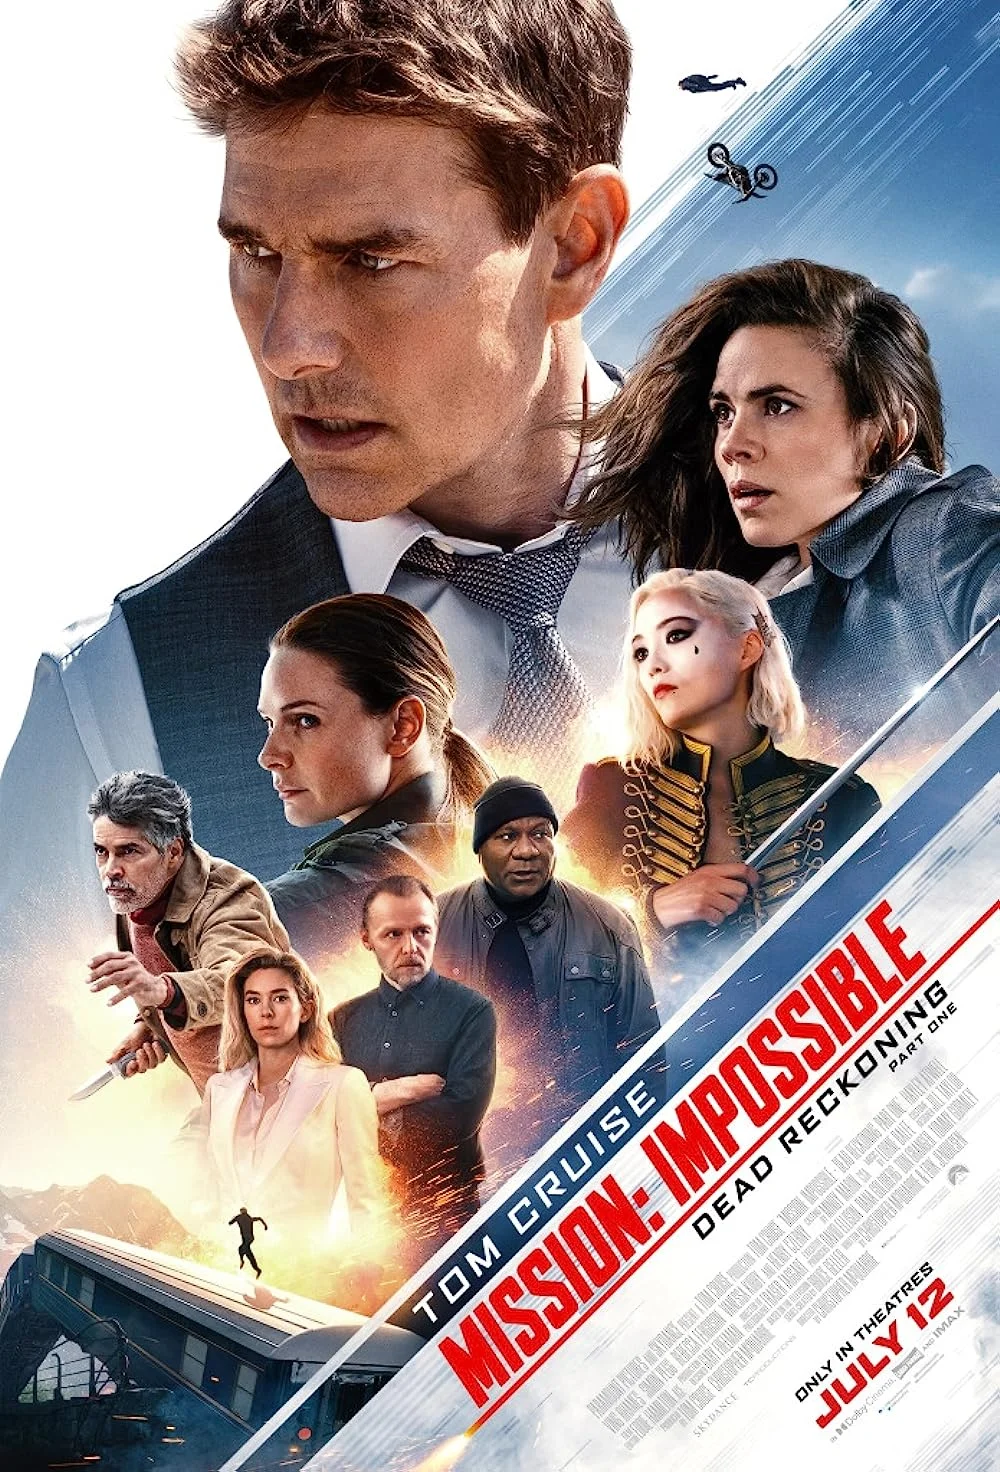 Read More About The Article Mission Impossible Dead Reckoning Part One (2023) | Hollywood Movie